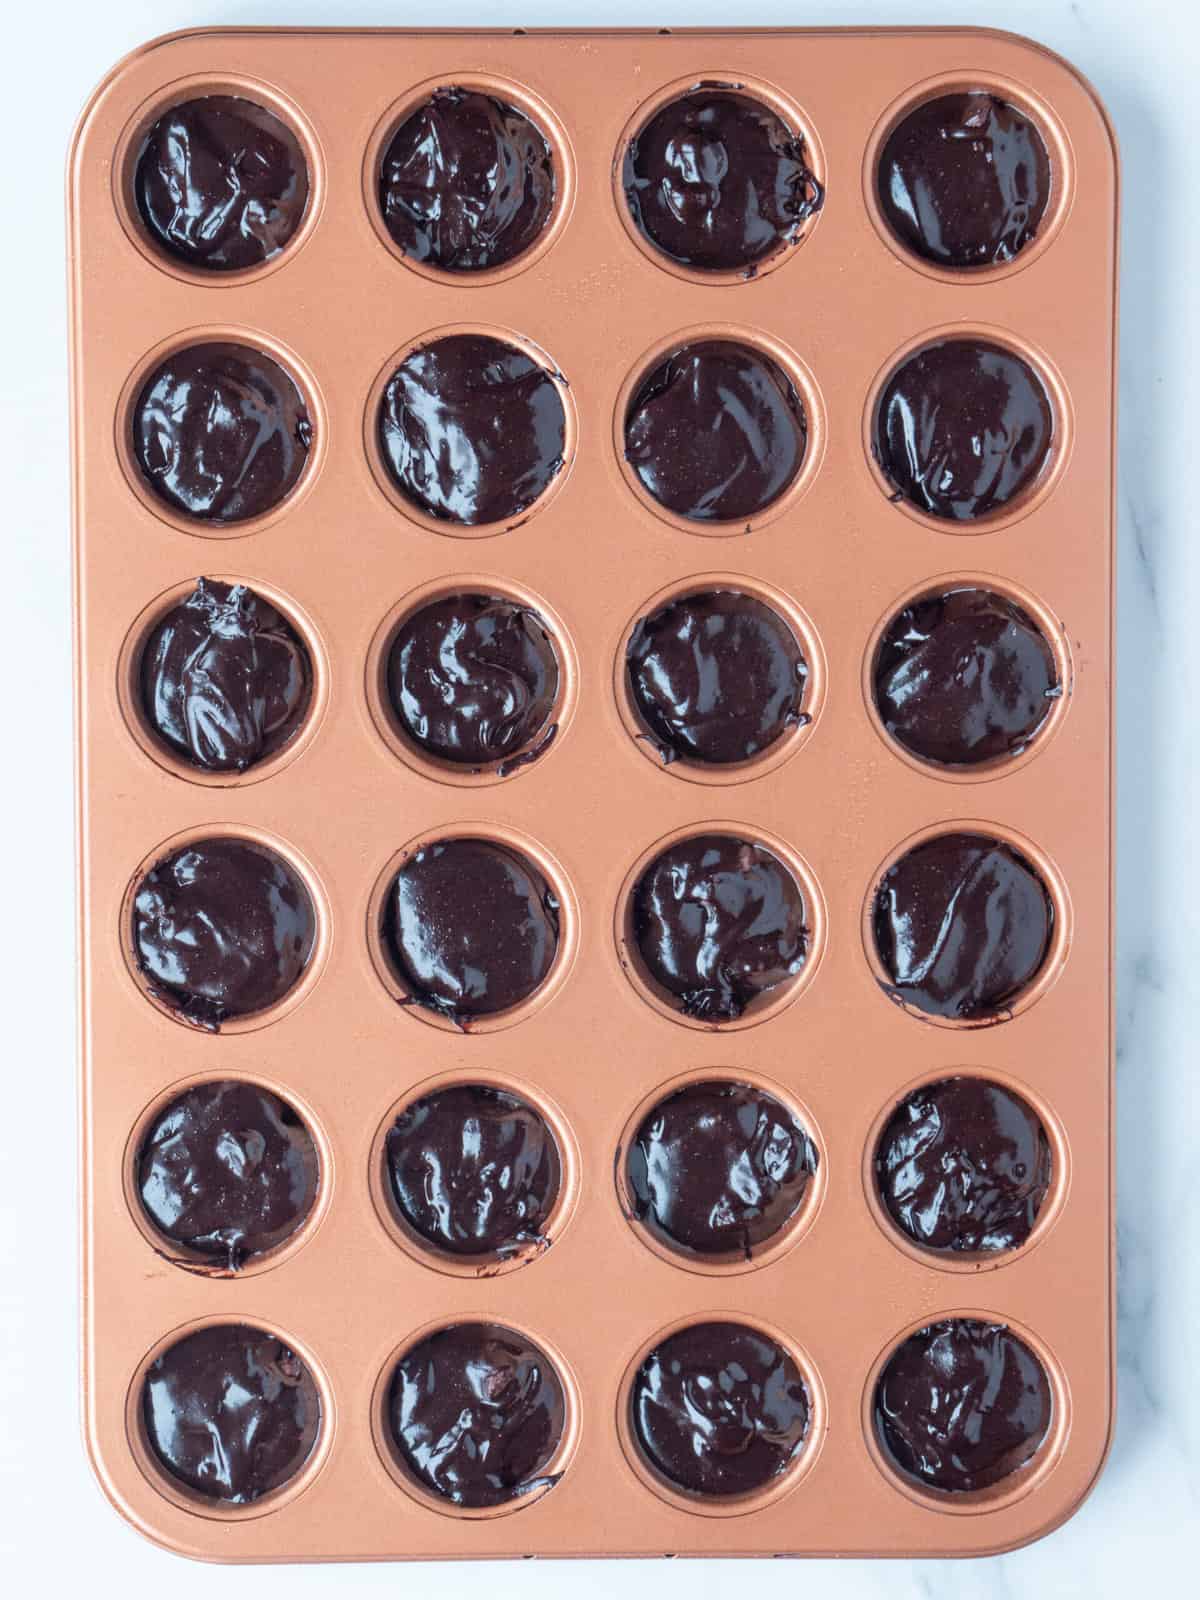 A 4x6 mini cupcake pan with brownie mixture scooped into it.